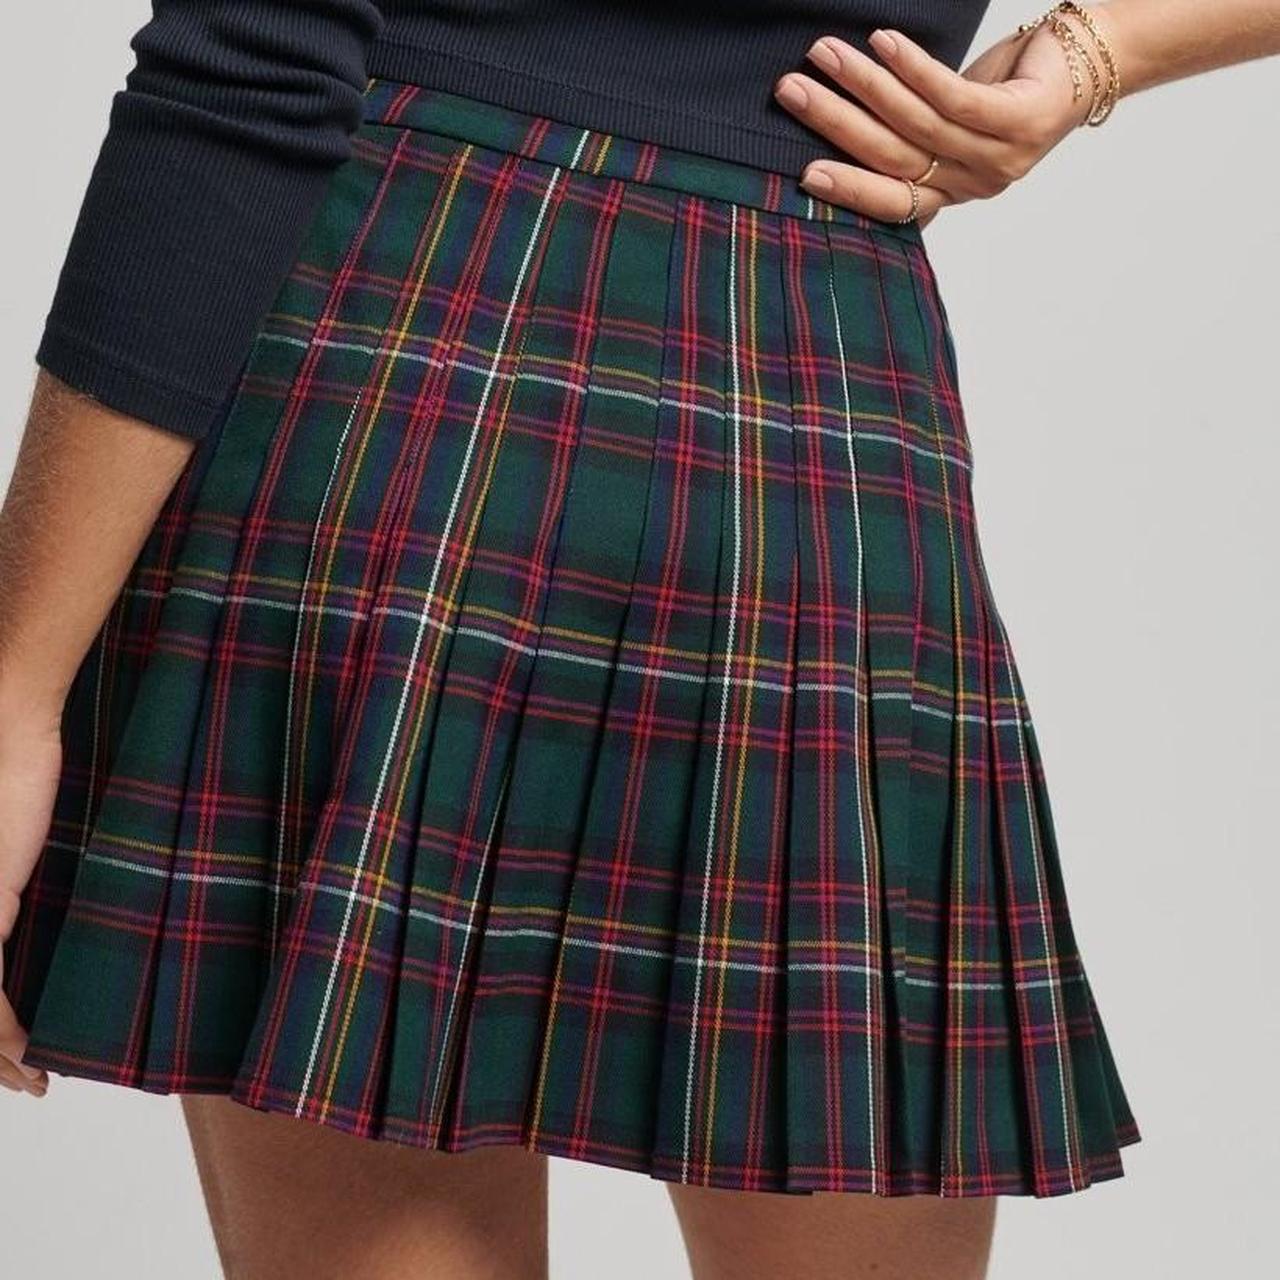 Superdry tartan mini skirt Only worn once, condition... - Depop